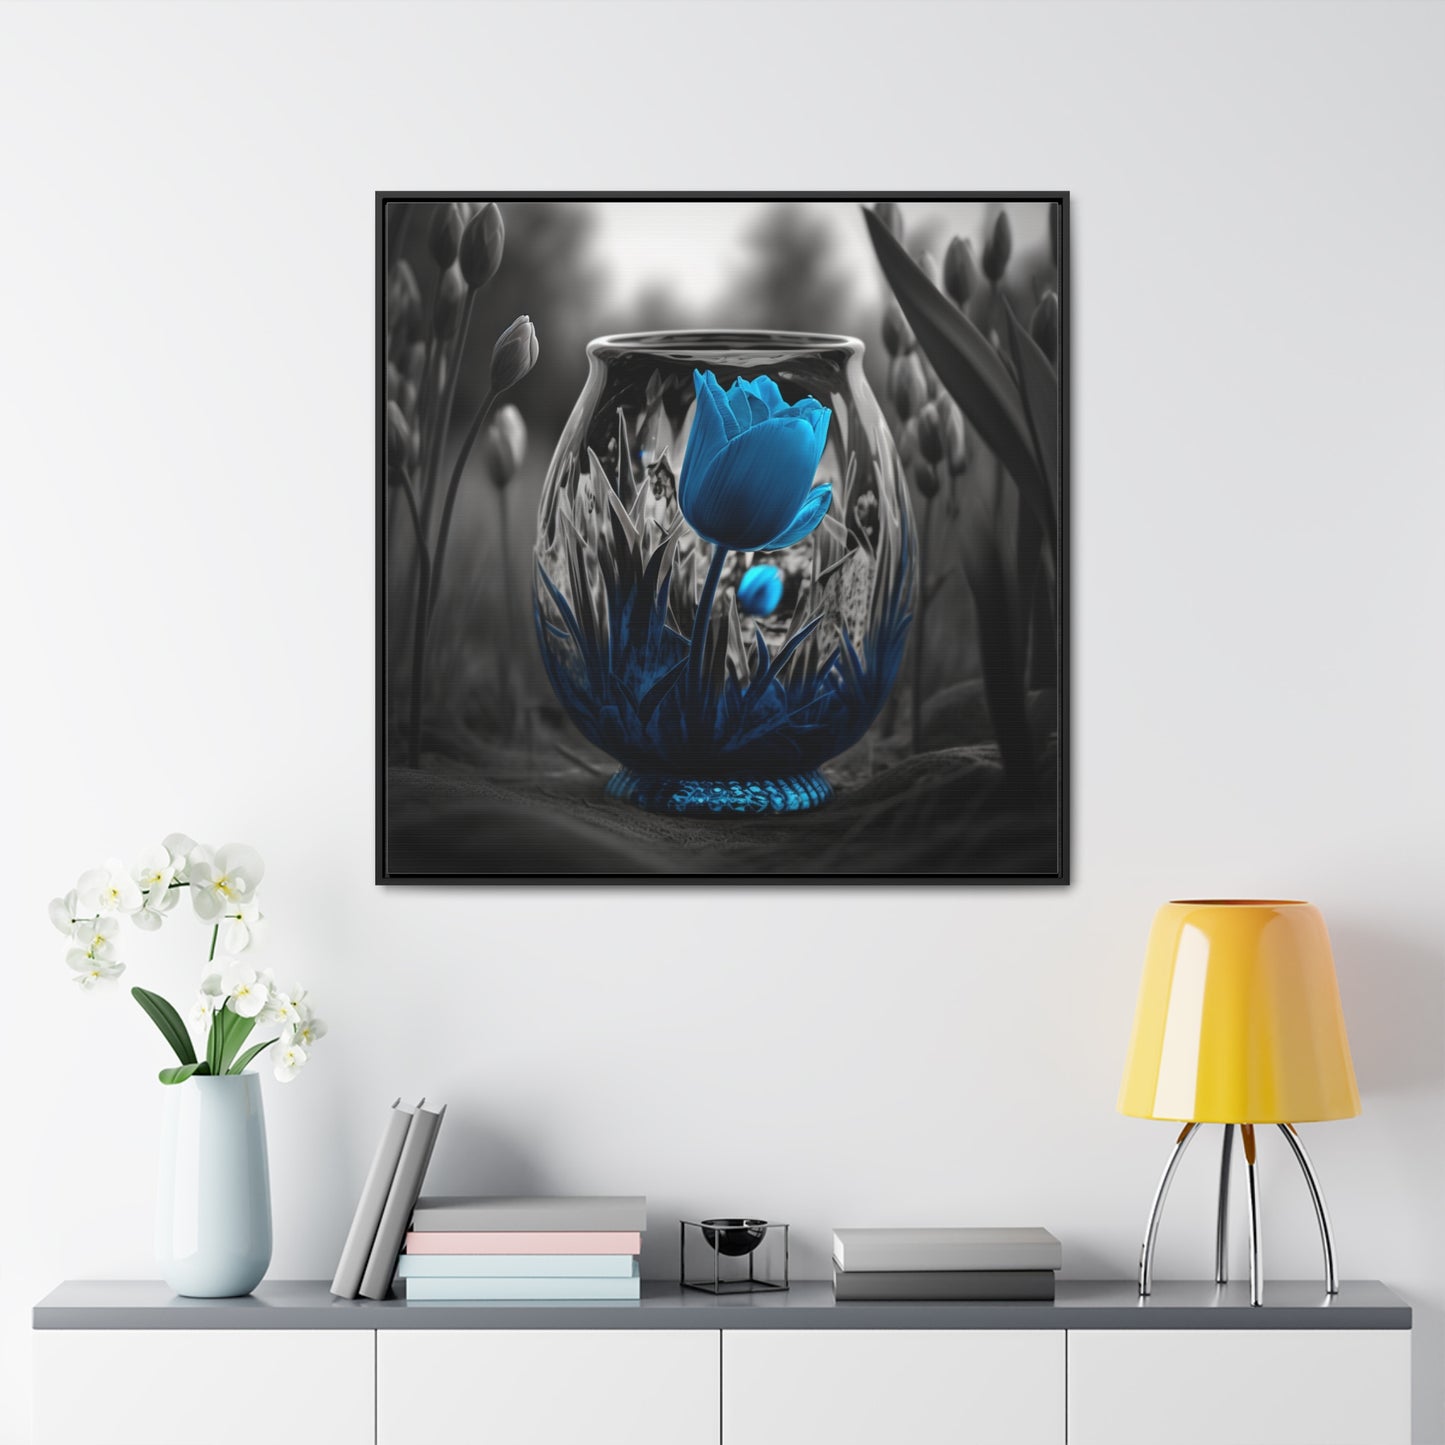 Gallery Canvas Wraps, Square Frame Tulip Blue 6